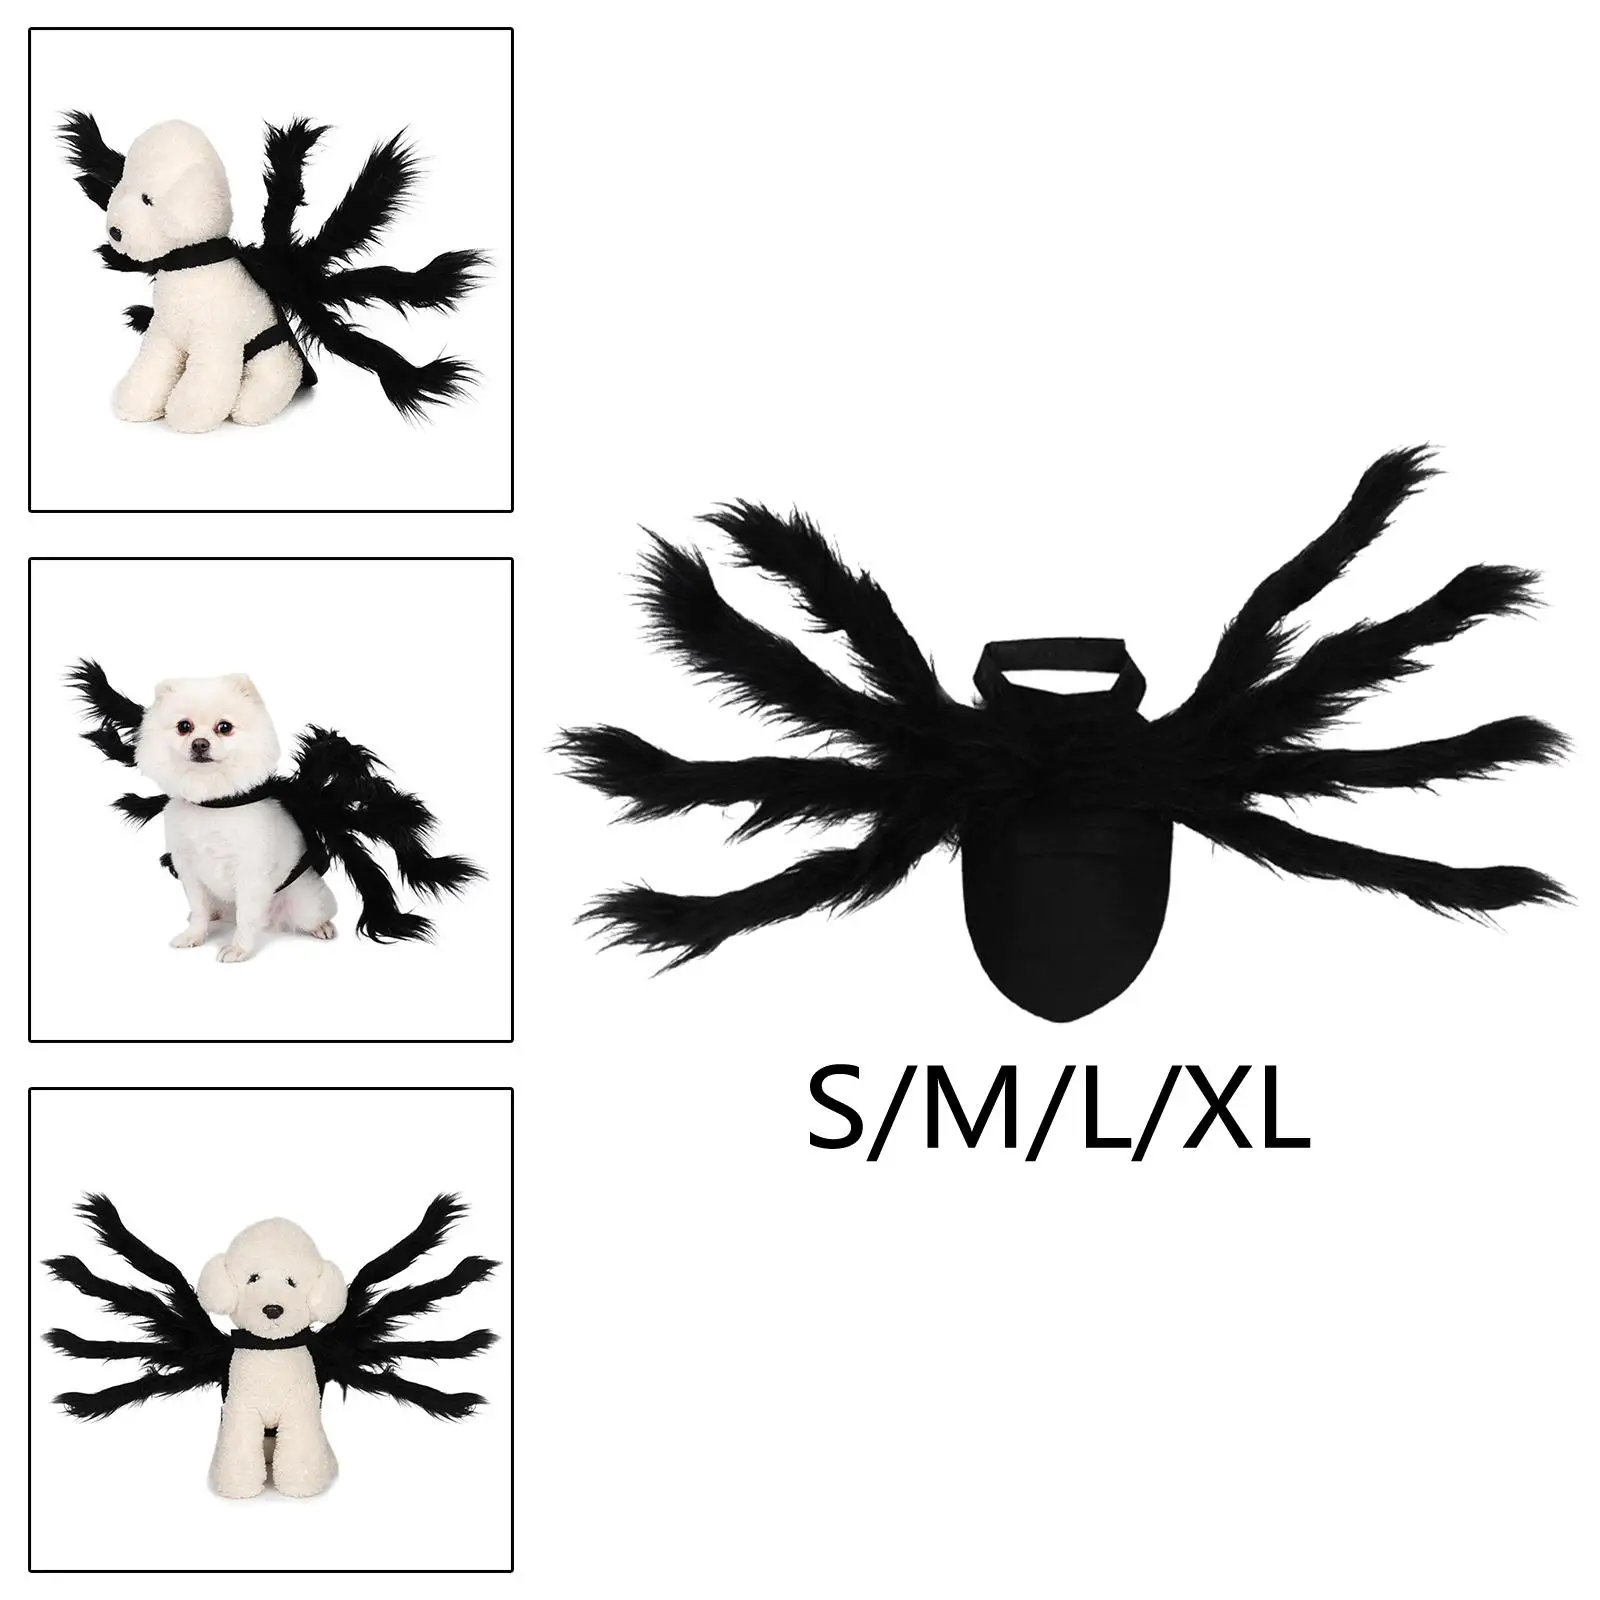 Spider Dog Costume Dress up Funny Black Dog Halloween Costume Accessories Costume Pet for Halloween Festival Holiday Cats Kitten